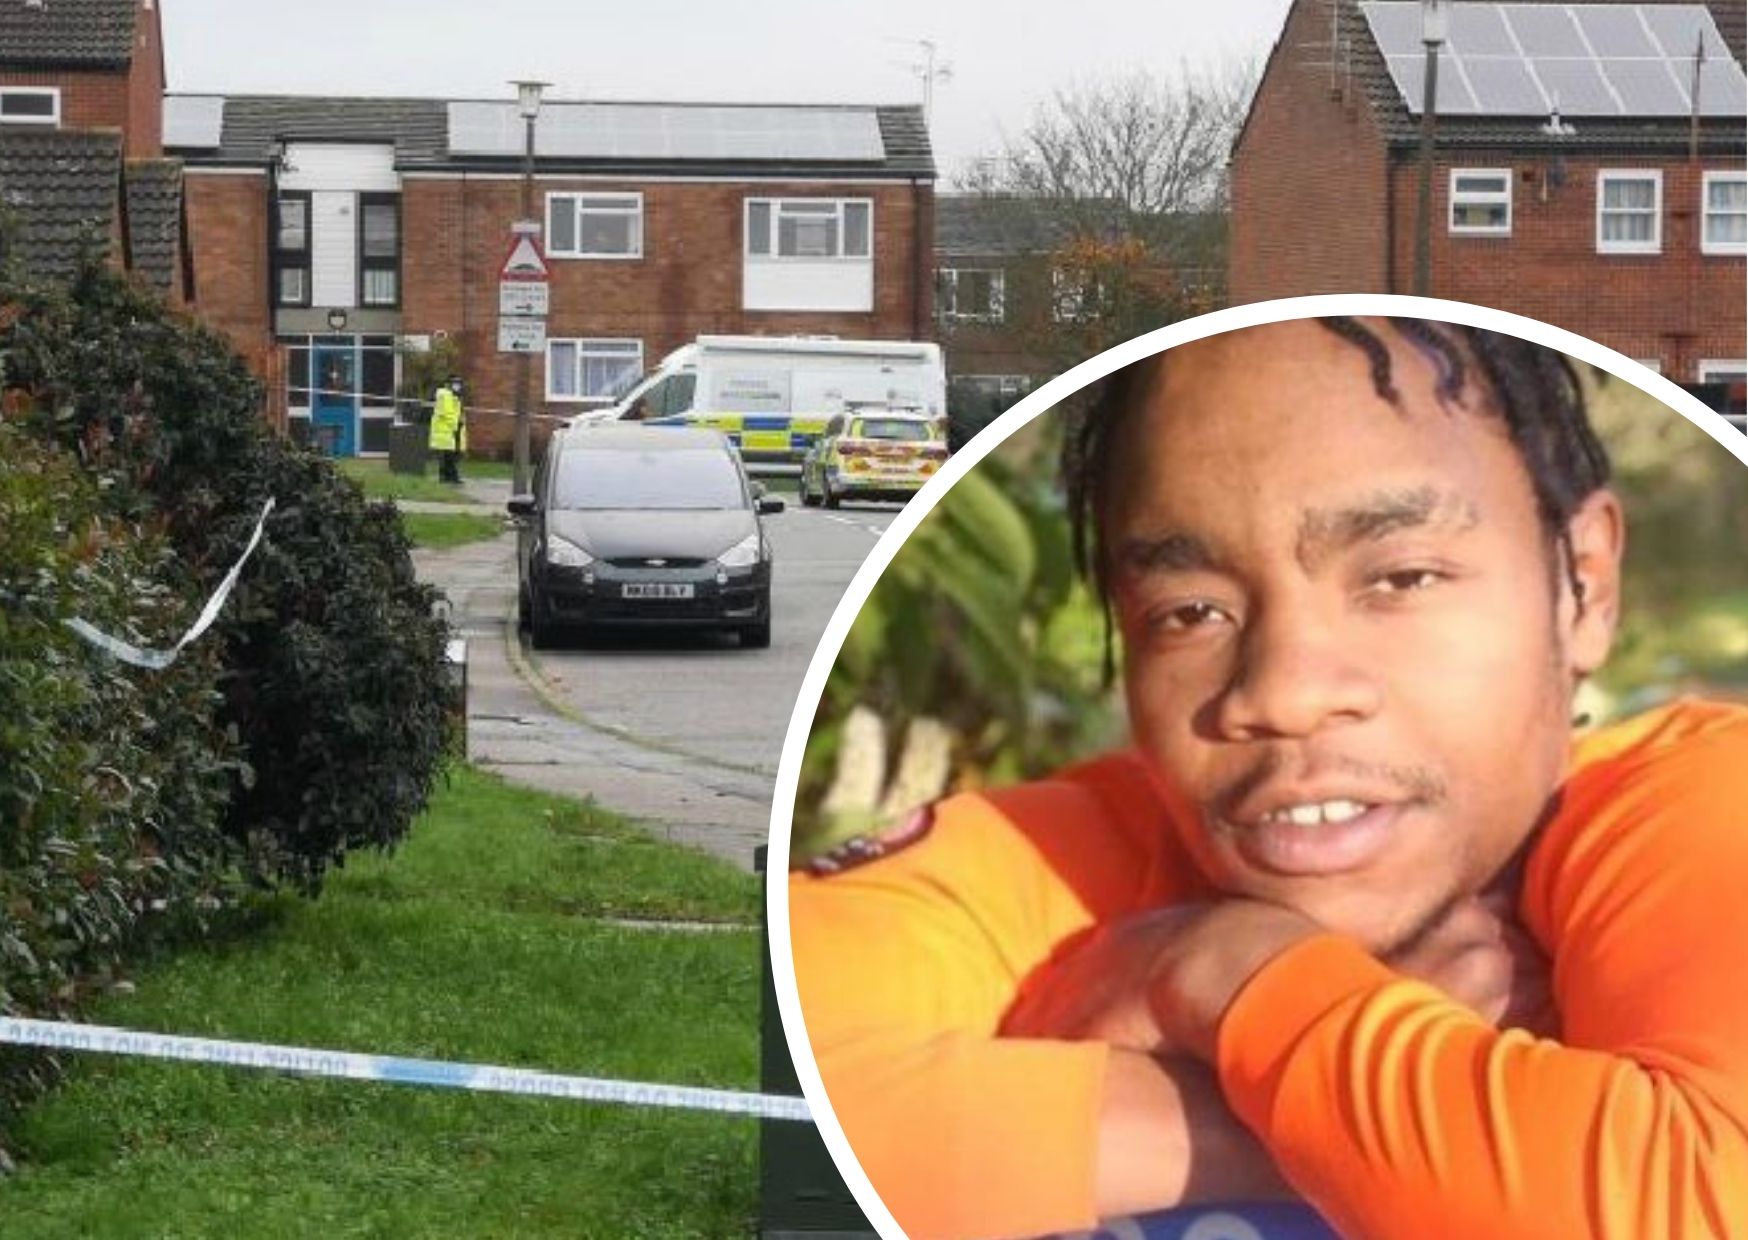 Colchester murder accused: Someone said 'get the big shank'